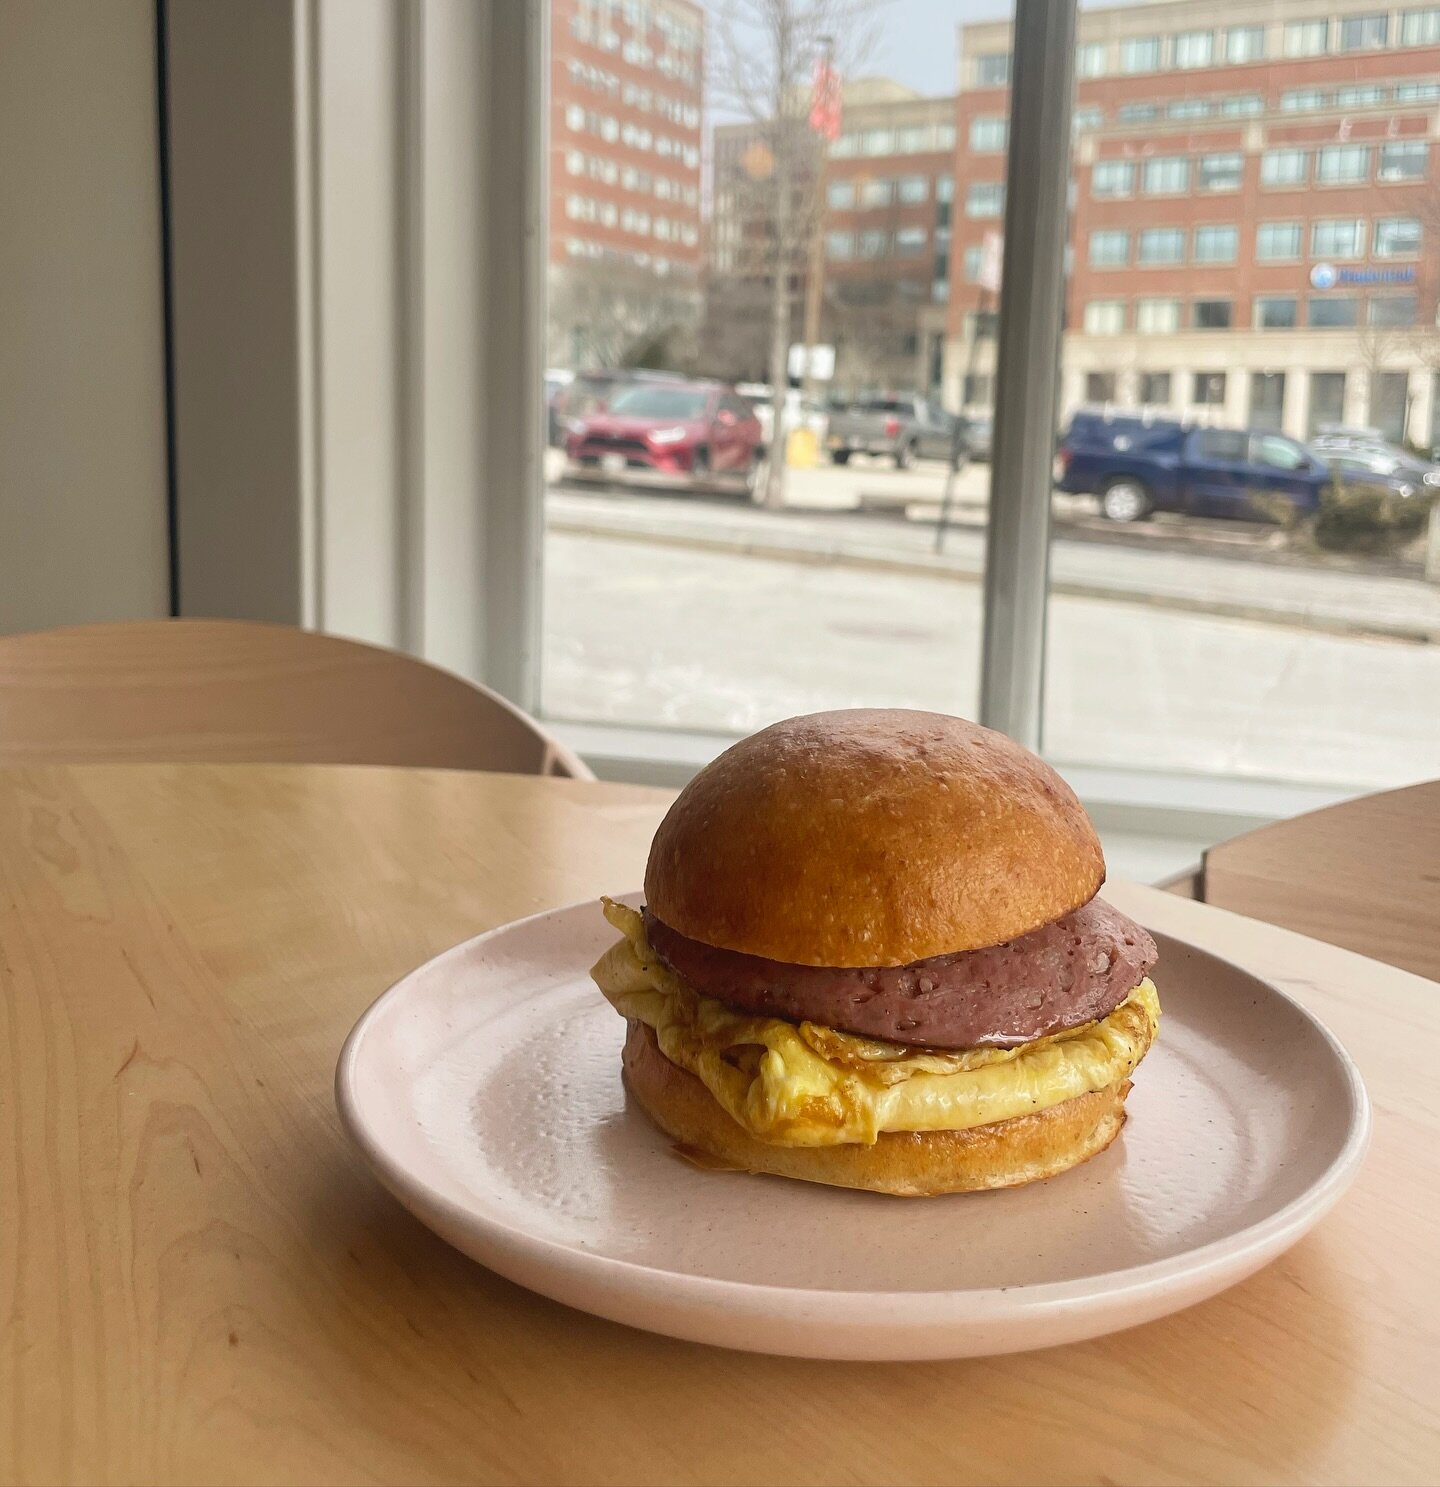 🥪 WEEKDAY BREAKFAST SANDO 🥪
House-made pork roll (IYKYK!), egg, and @coopercheese on a house-made potato bun. 
&bull;
Only available Monday-Friday, in case you needed an incentive to come see us on a weekday, and you can even pre-order these online